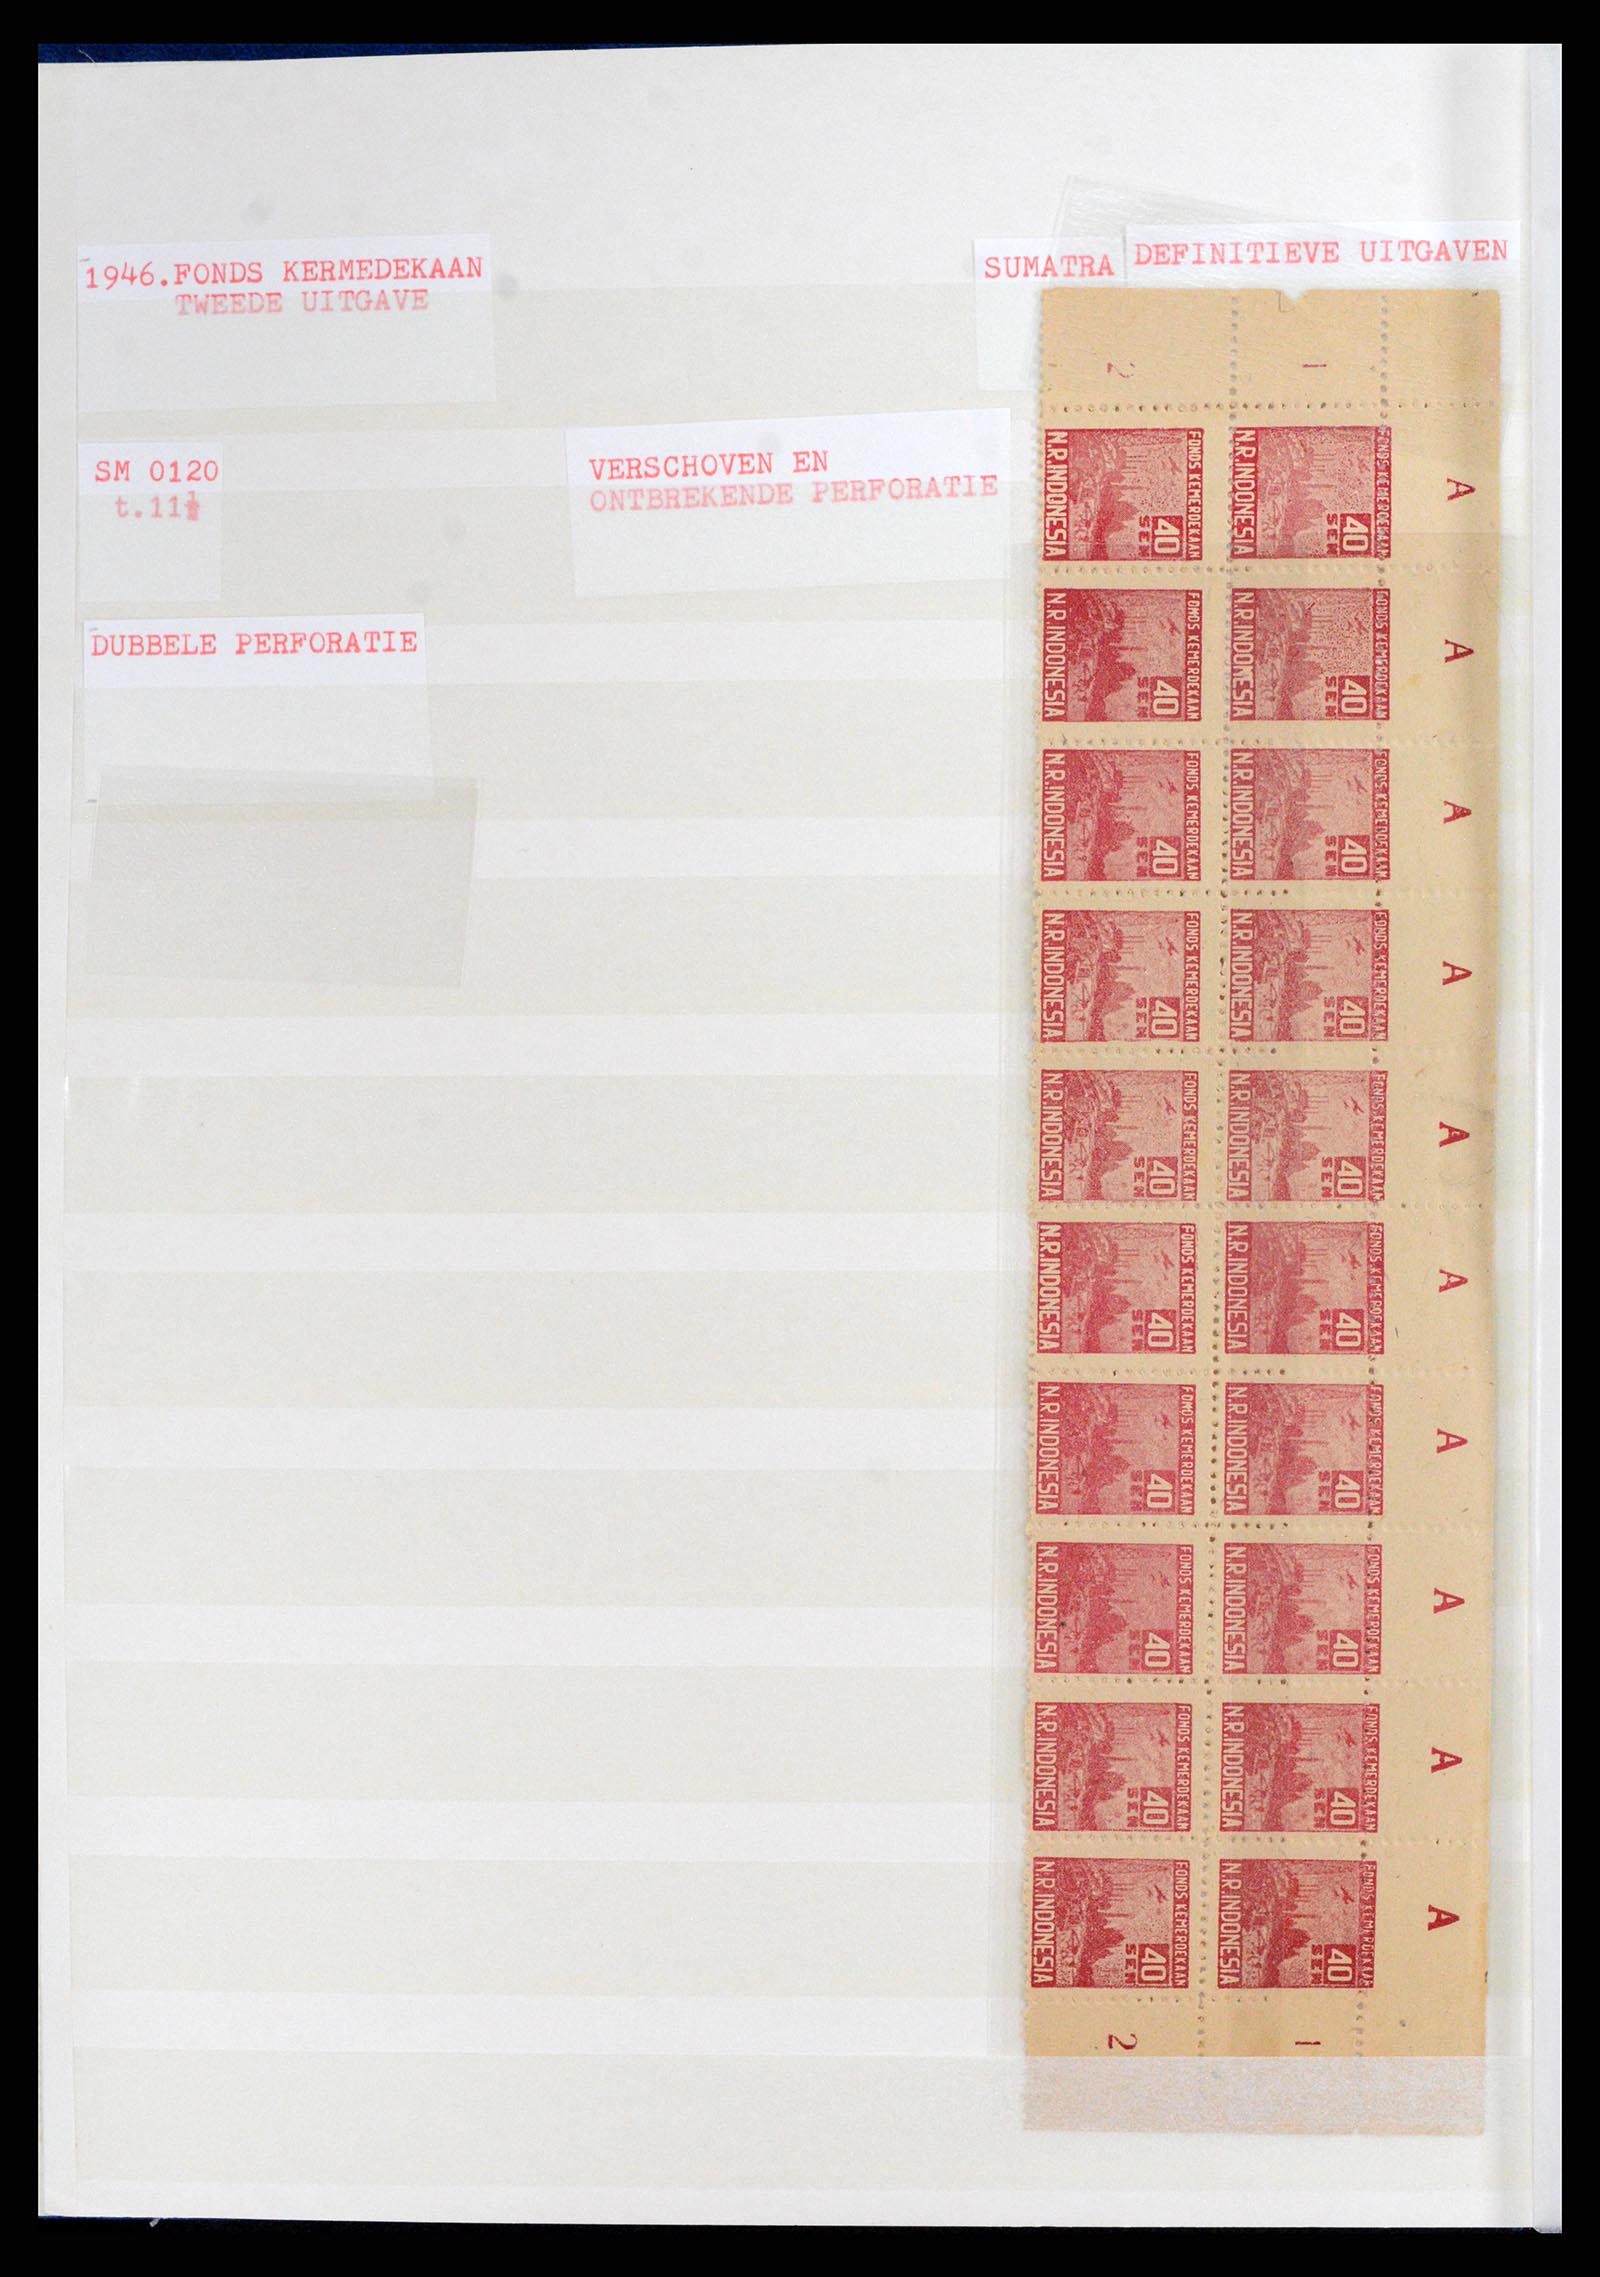 37692 093 - Stamp collection 37692 Indonesia interimperiod 1945-1499.